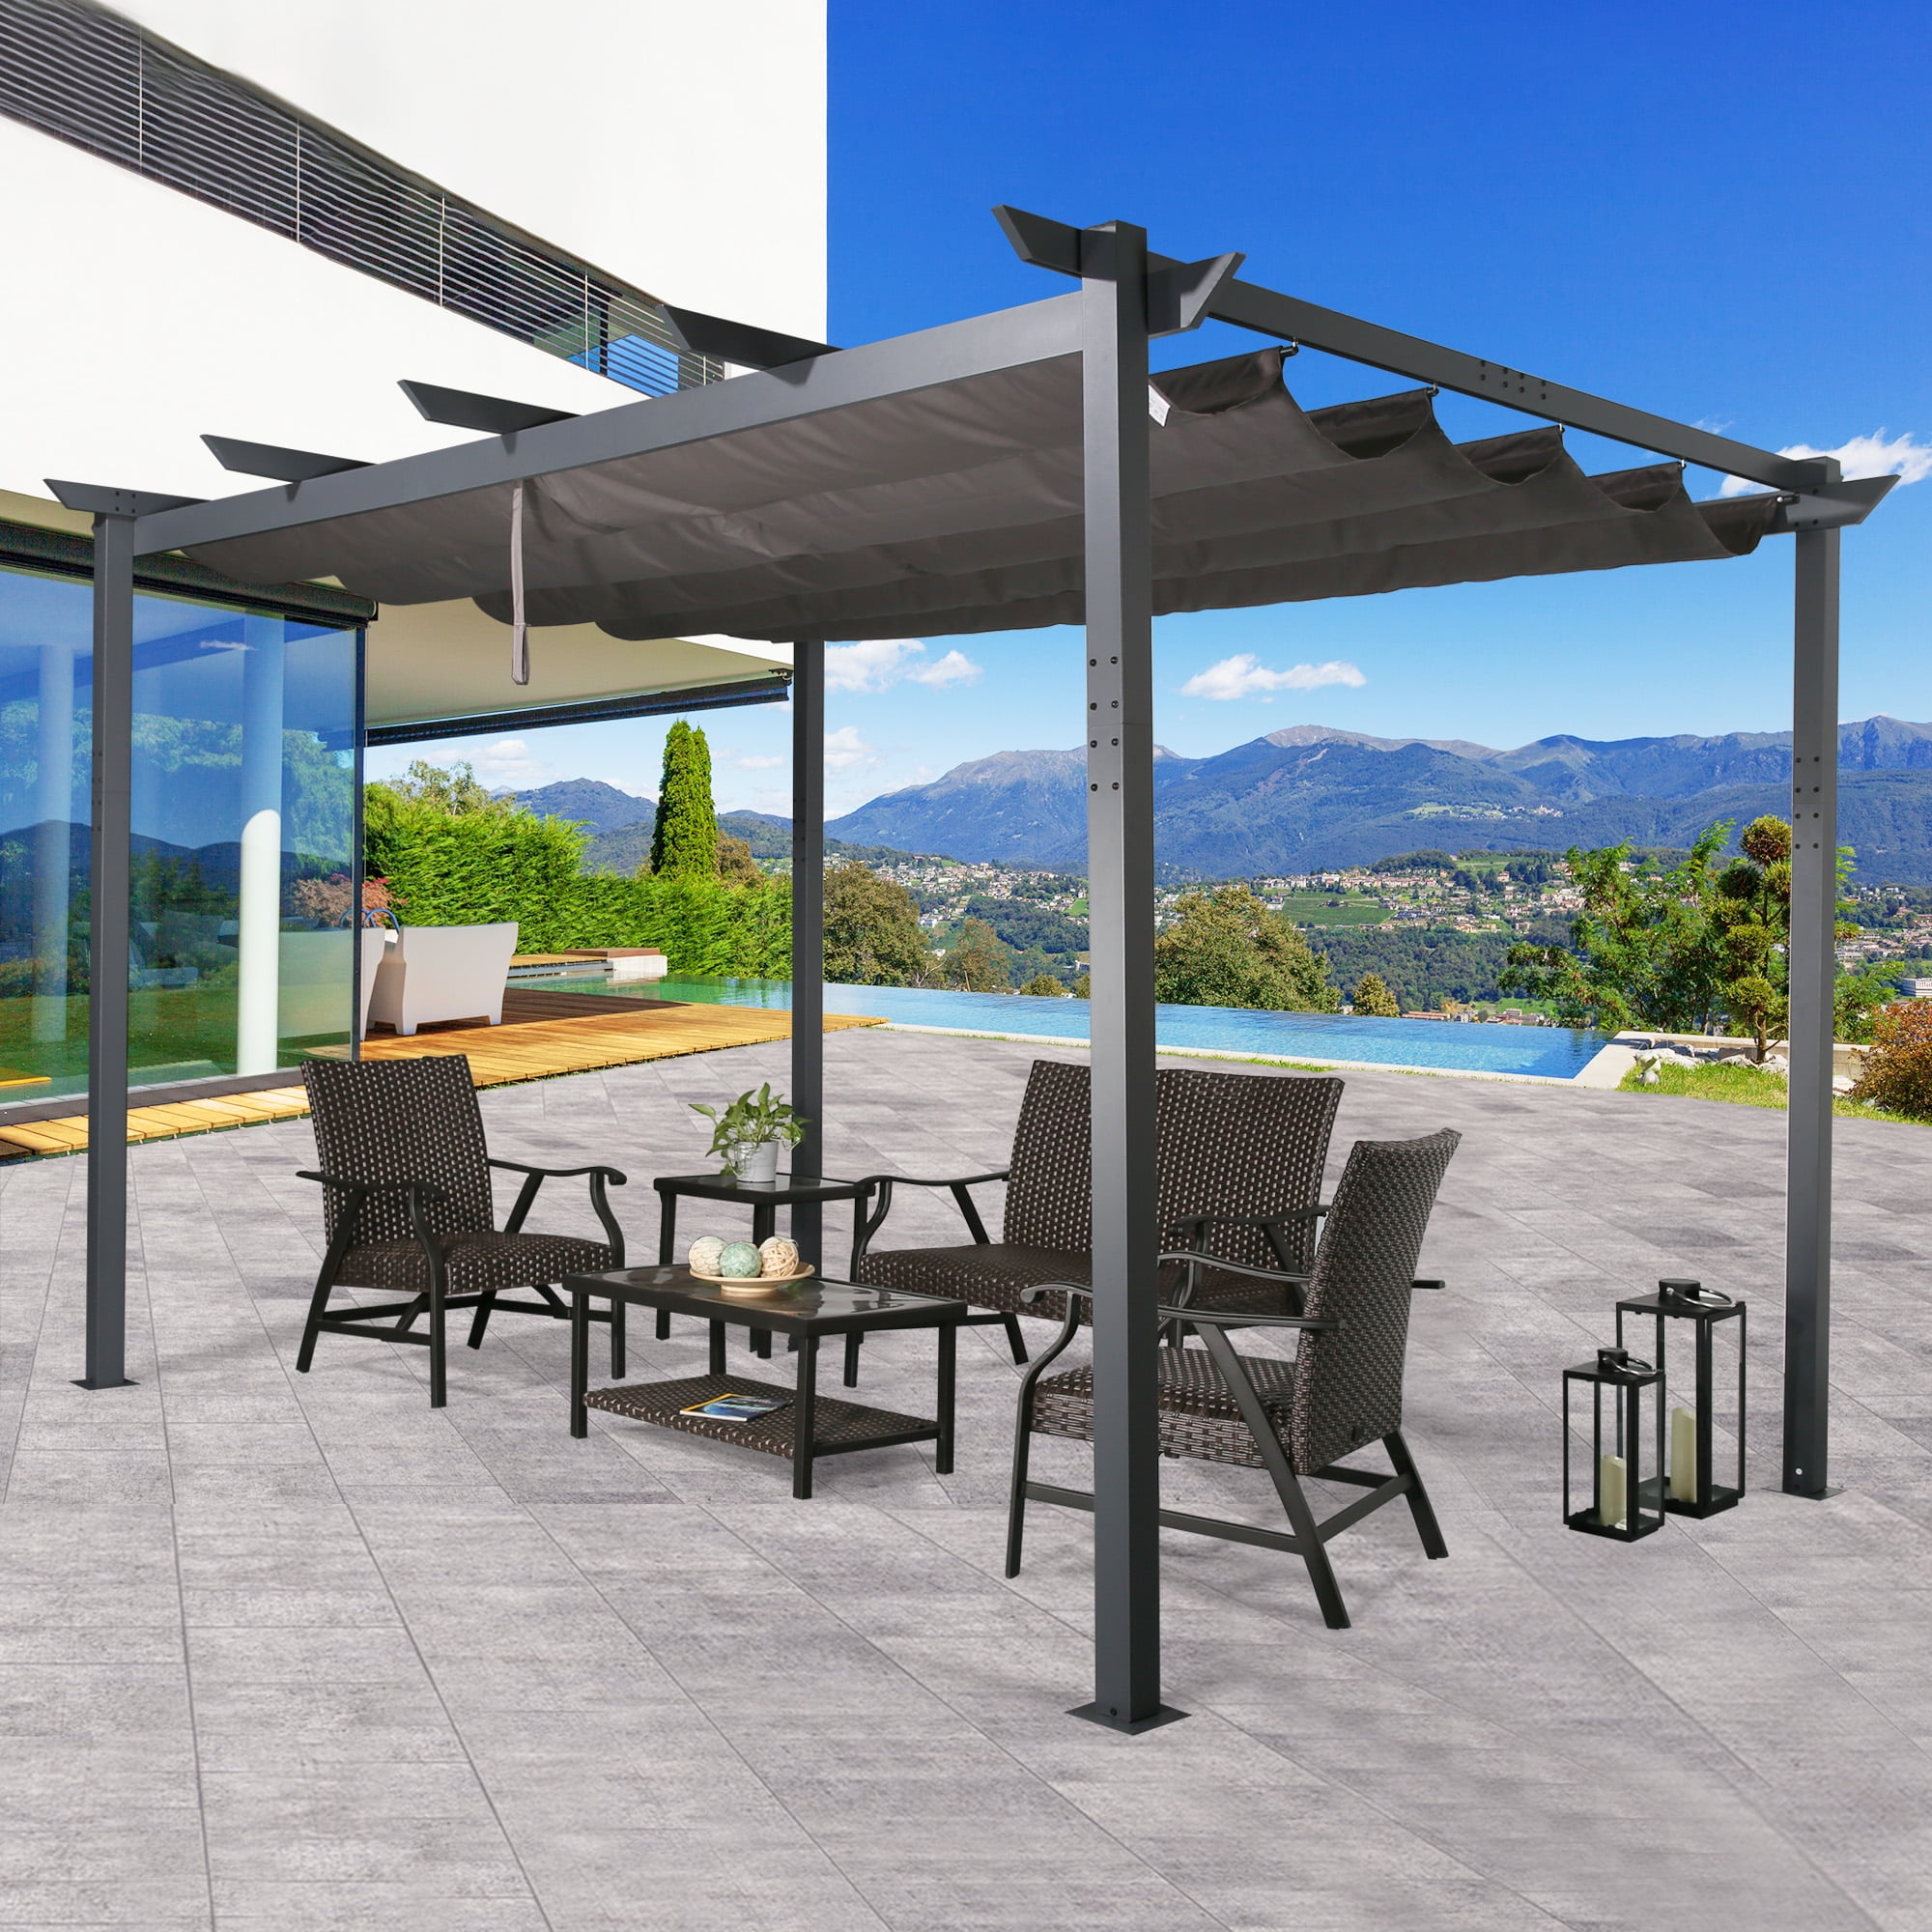 Beige Ulax Furniture Outdoor Pergola with 10' x 10' Retractable Canopy Cover for Patio Backyard Pavilion Grill Gazebo 